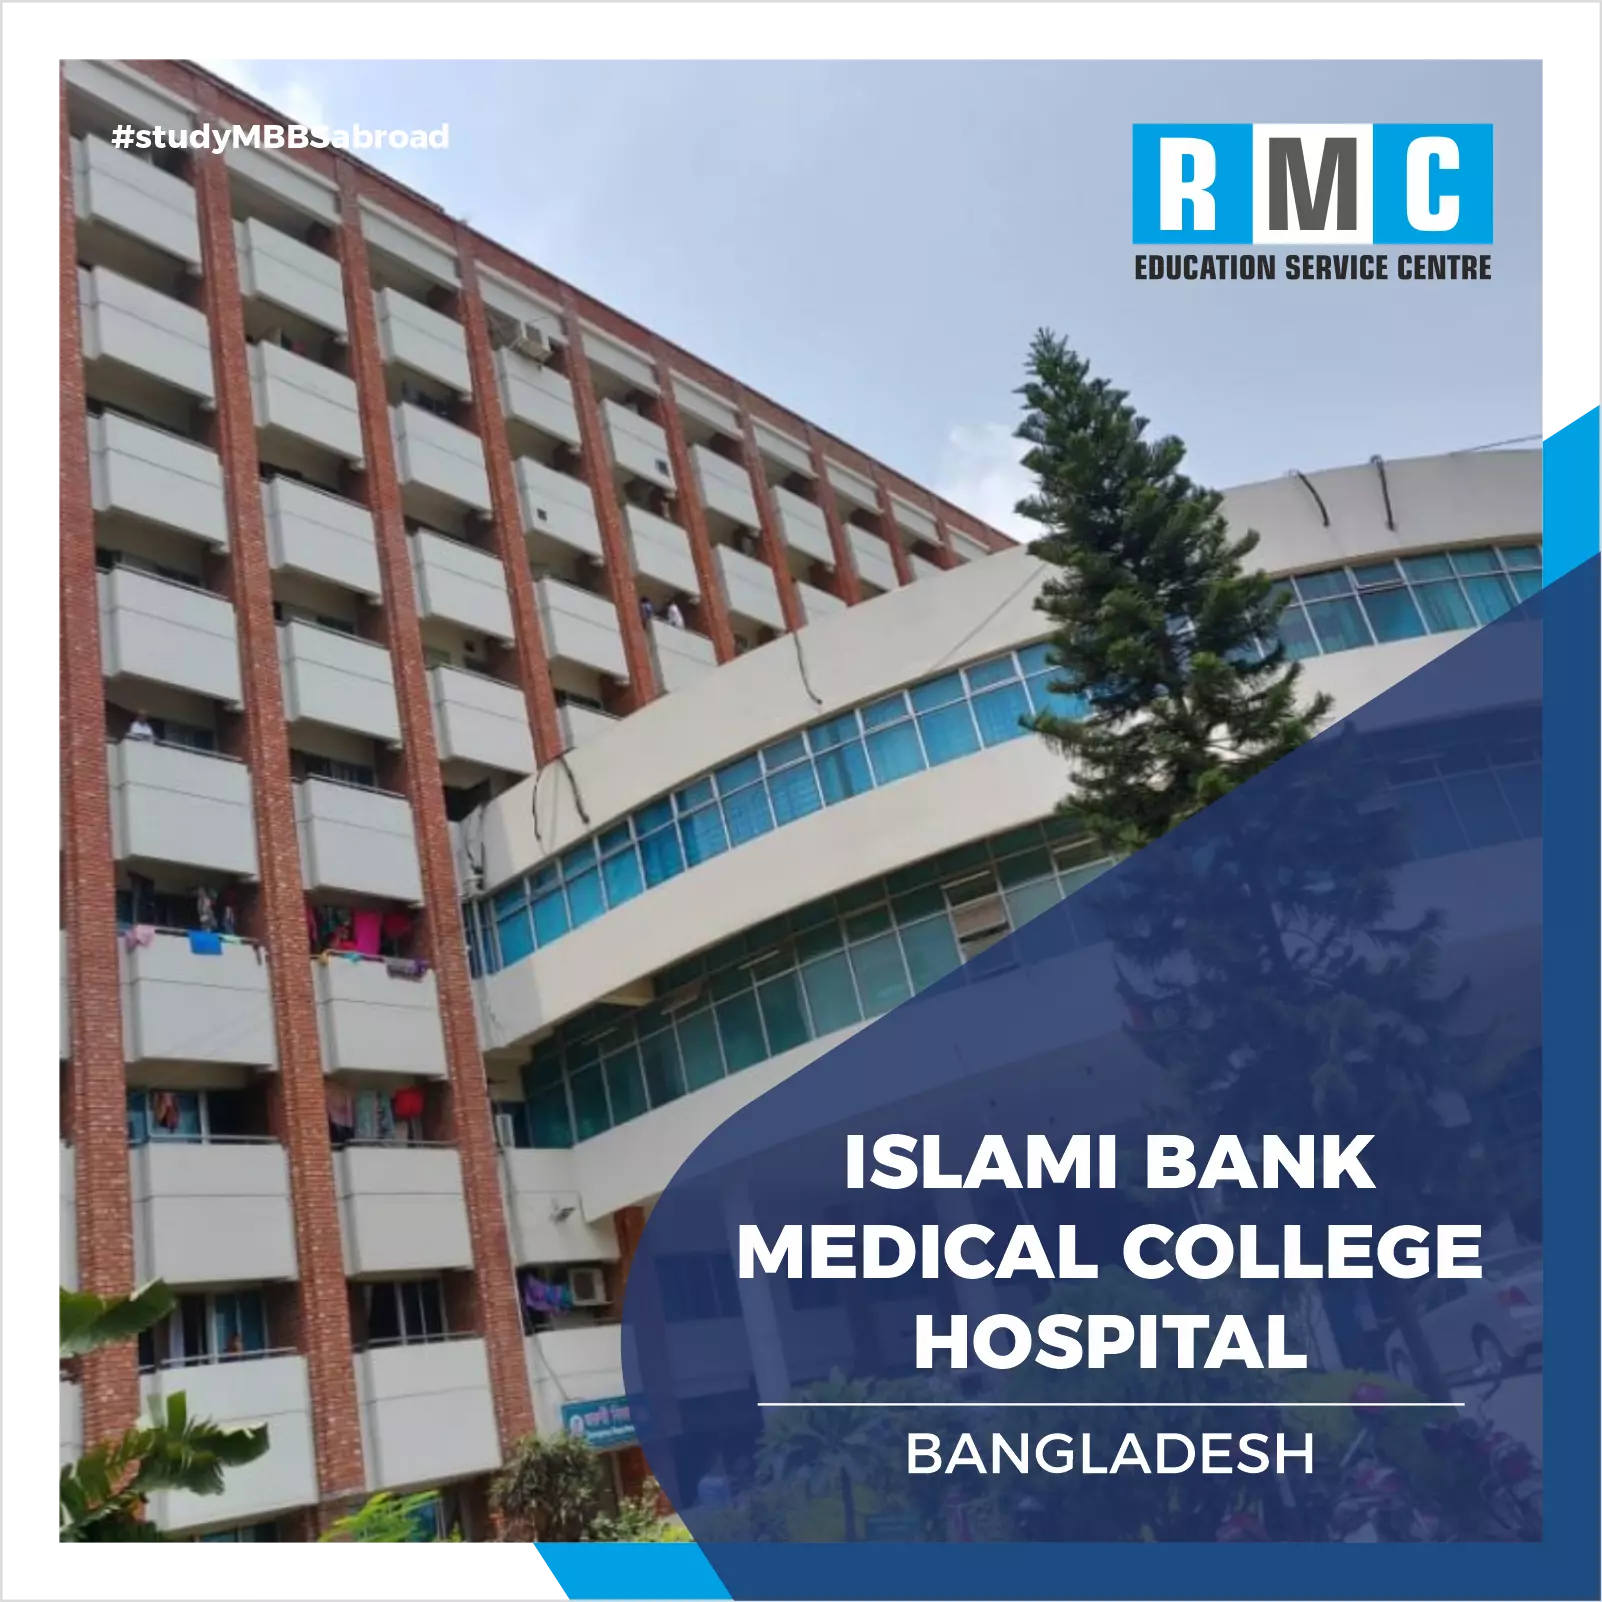 Islami Bank Medical College and Hospital